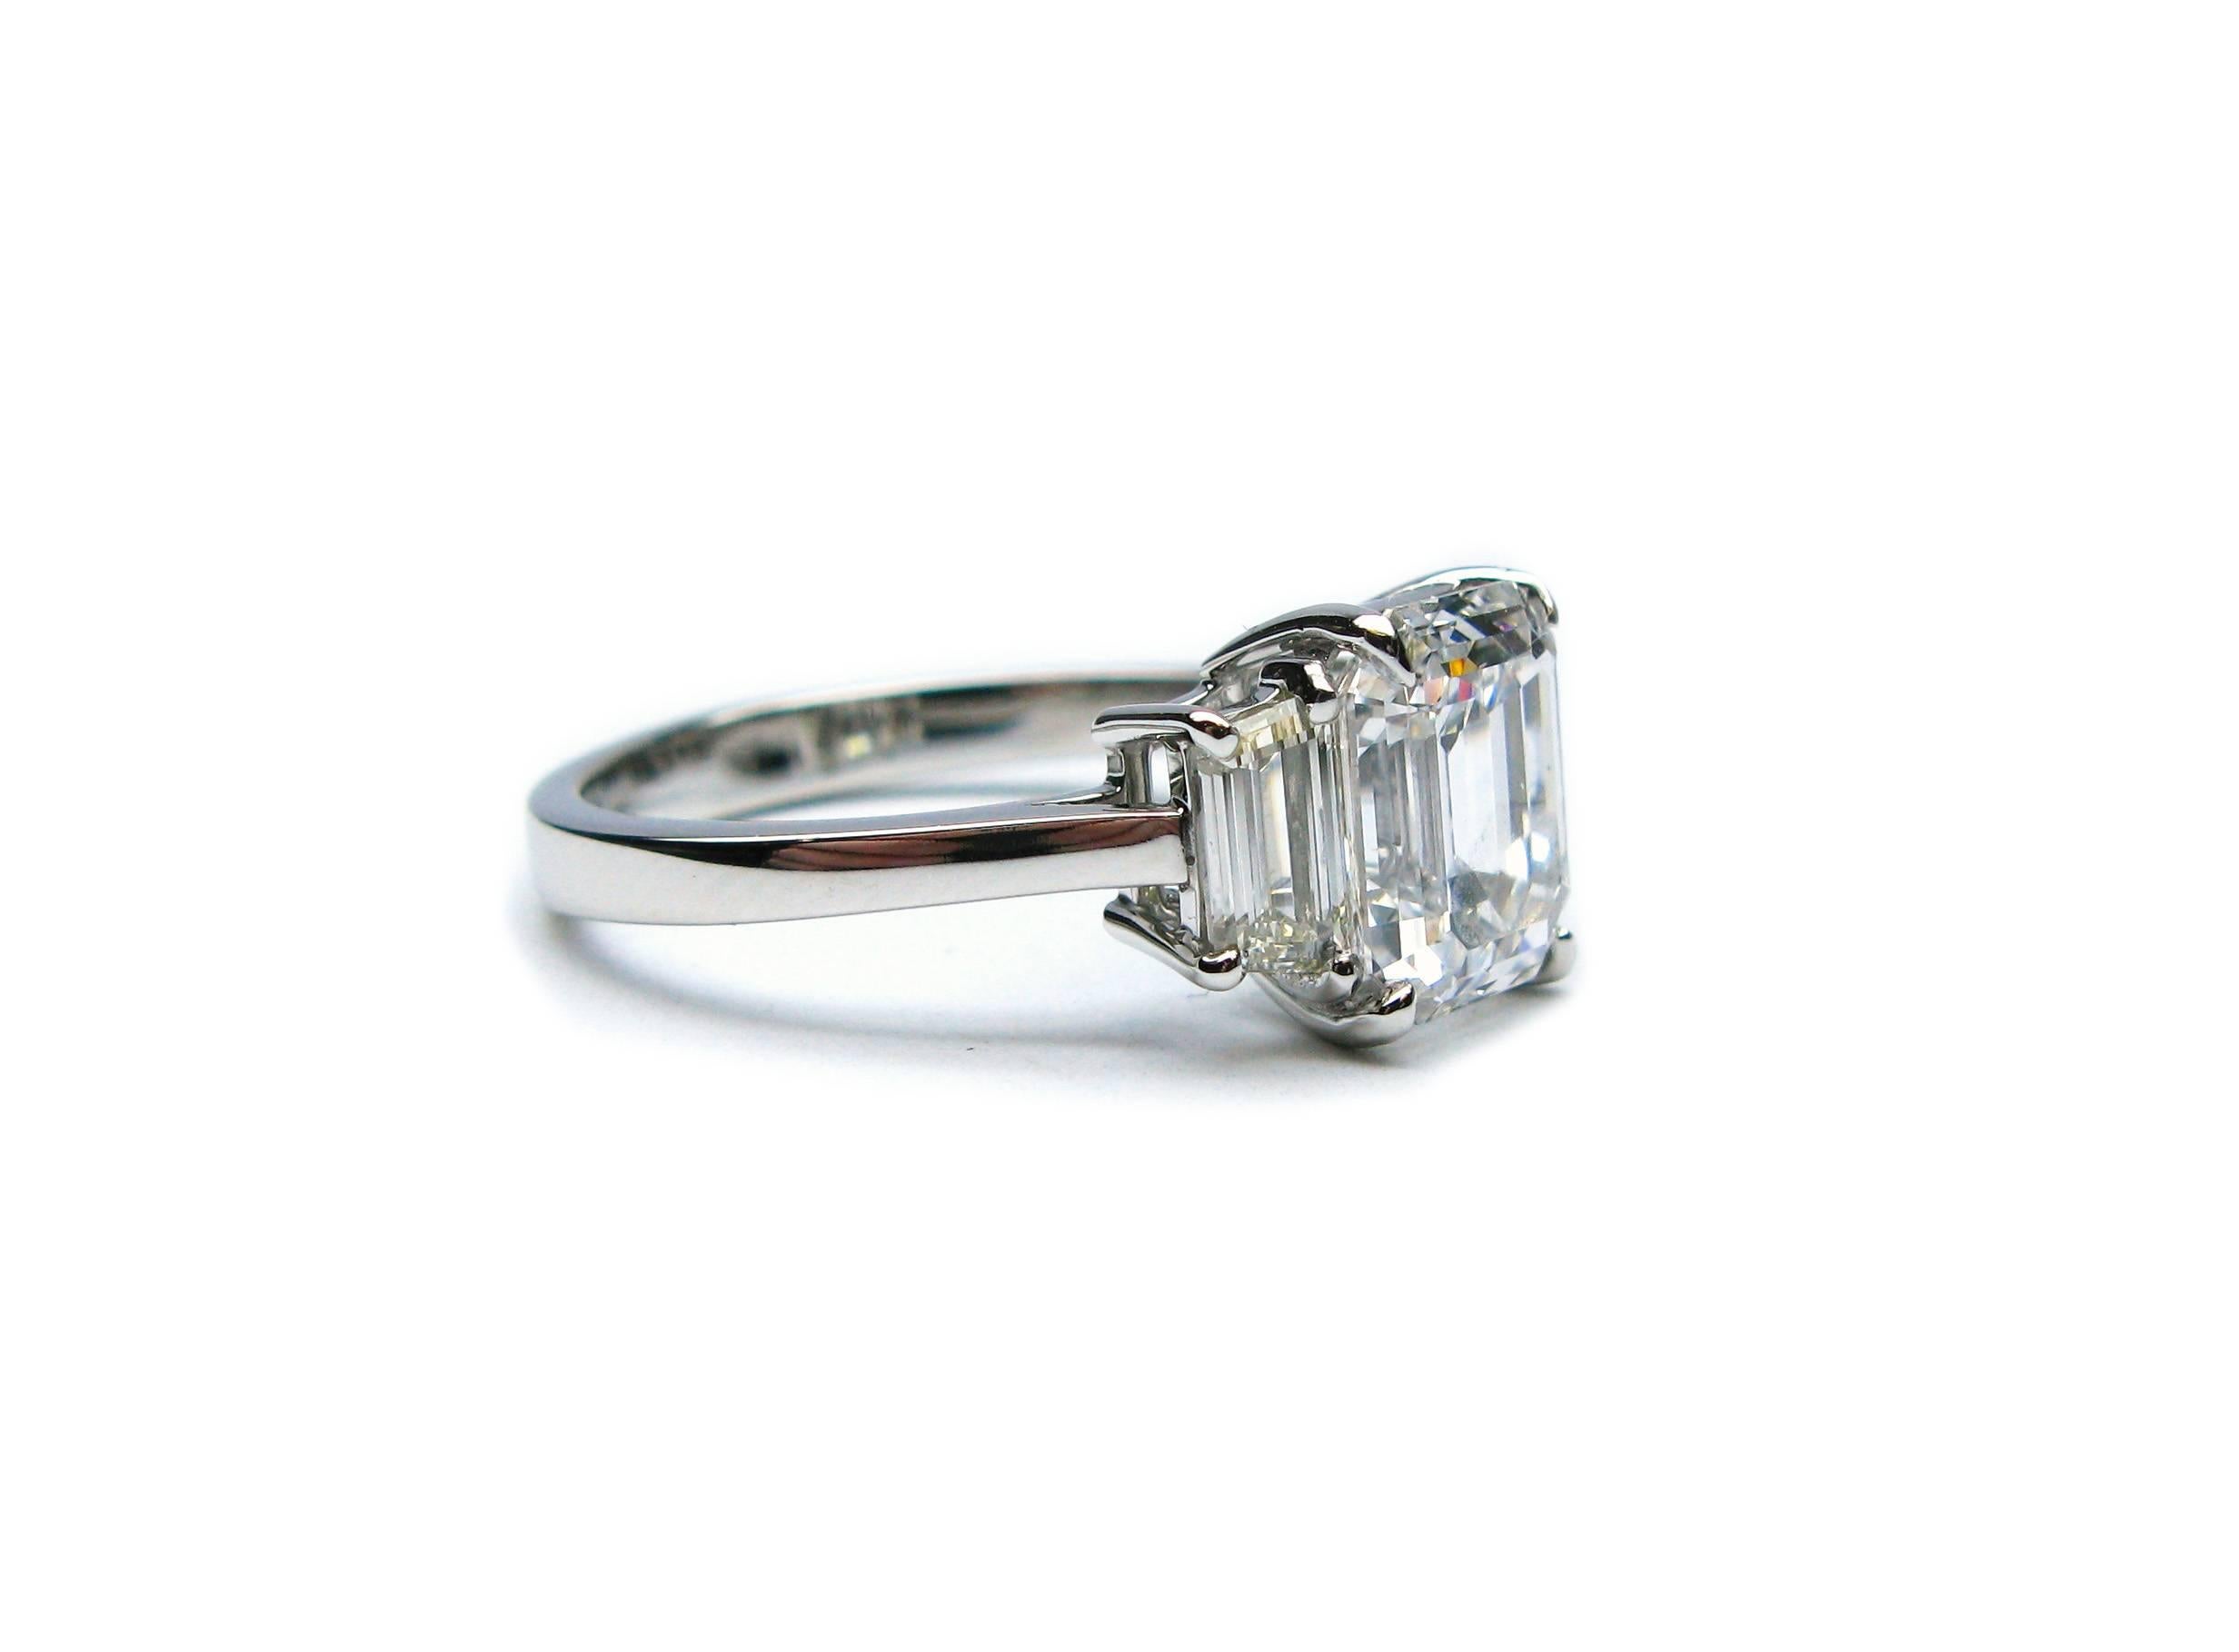 This handmade, platinum ring features a GIA certified 2.06 ct Emerald cut of D color and VS2 clarity... Set with step-cut trapezoid side stones = 0.72 ctw,  this timeless ring is guaranteed to make her say, 